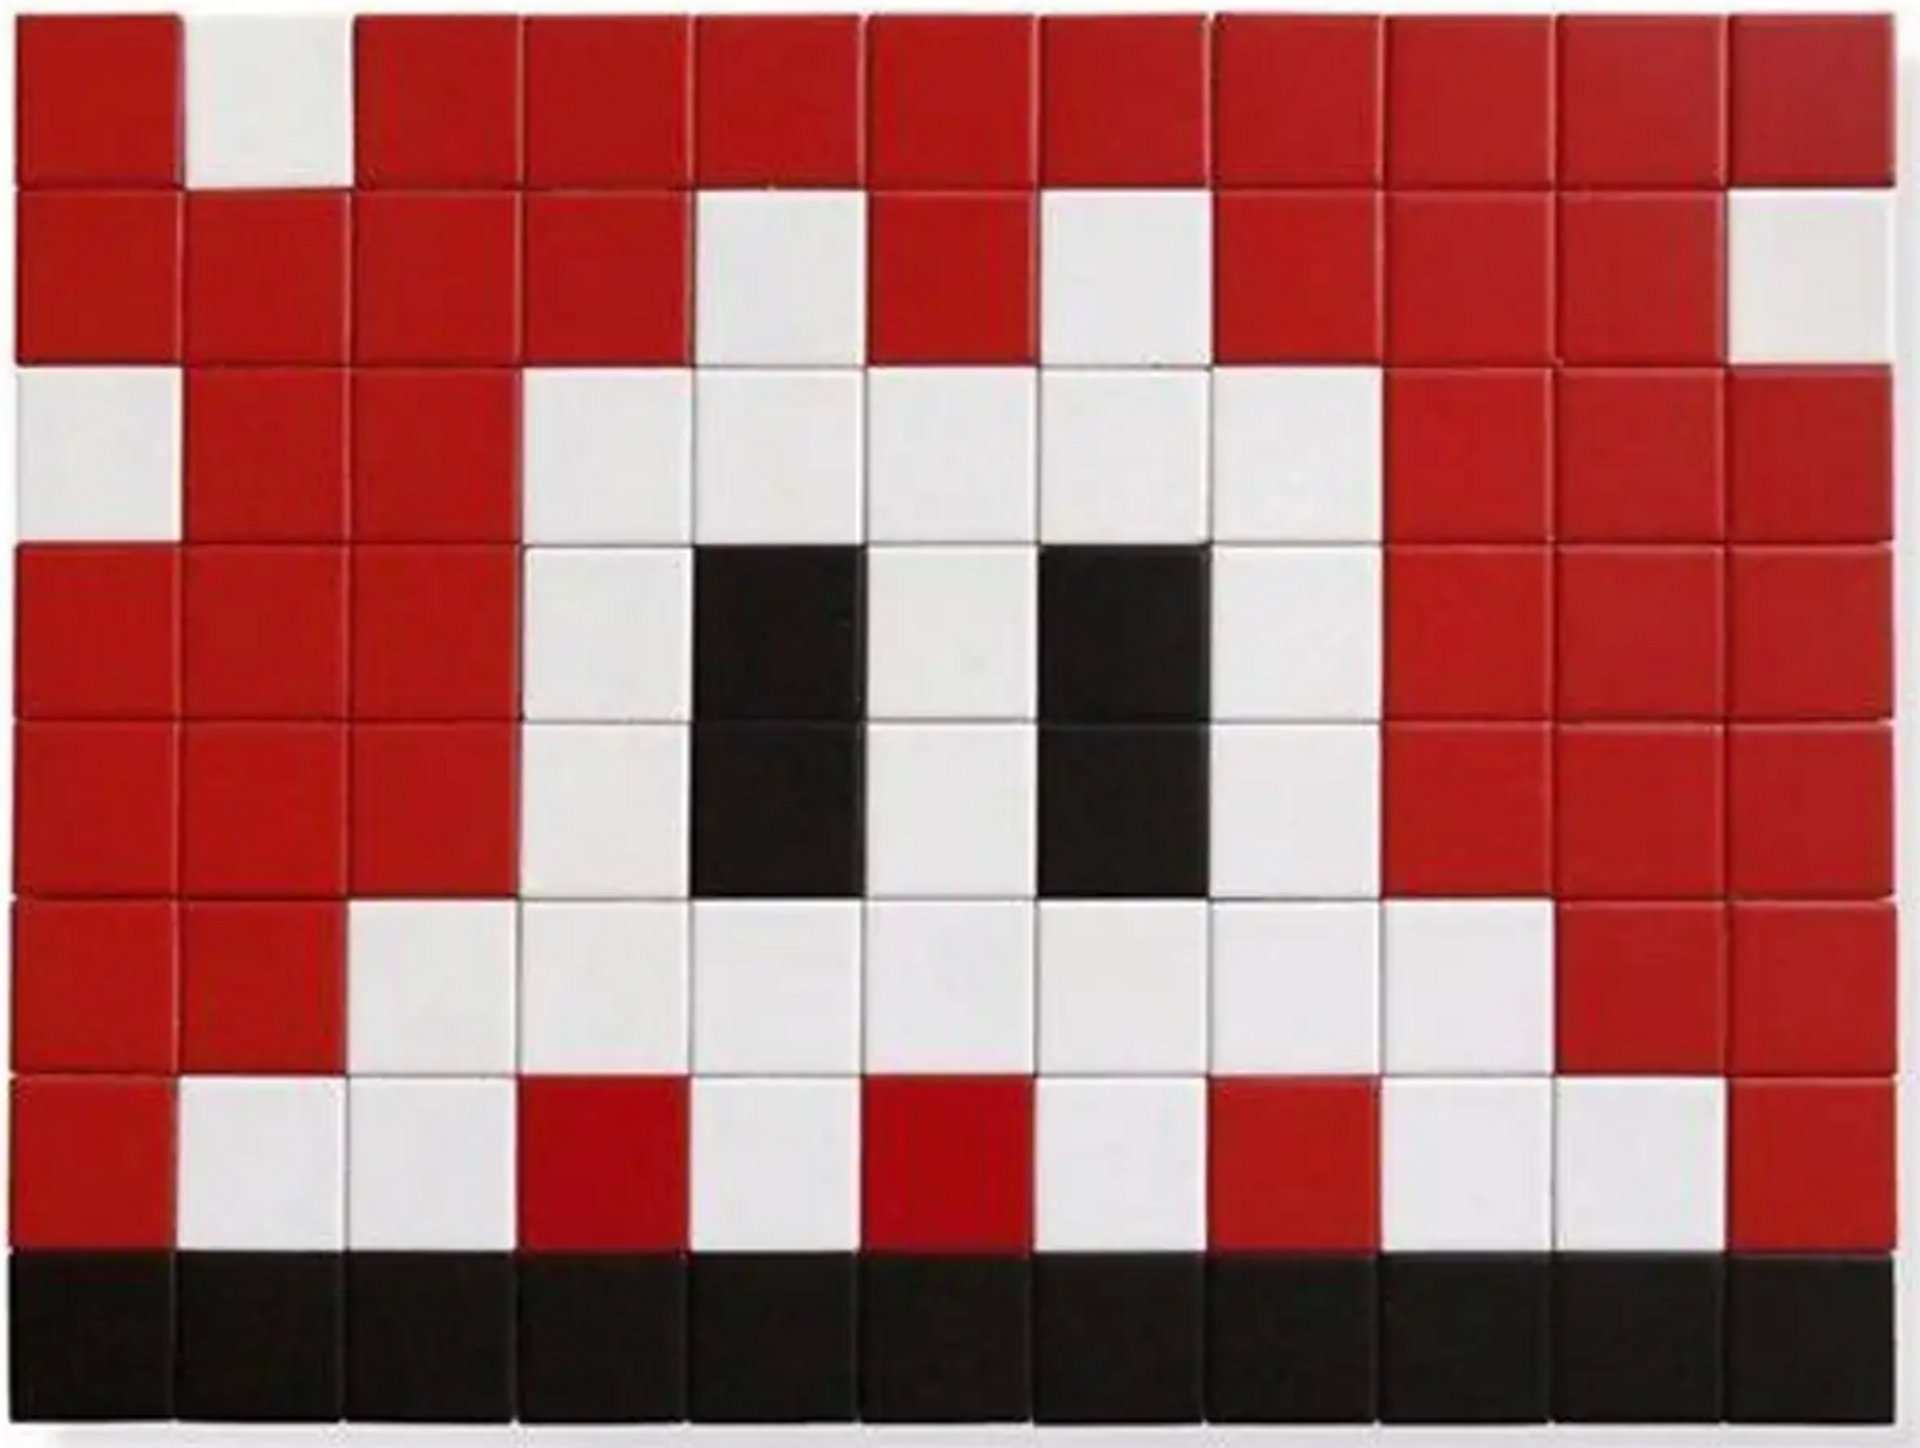 Ik For Msf by Invader